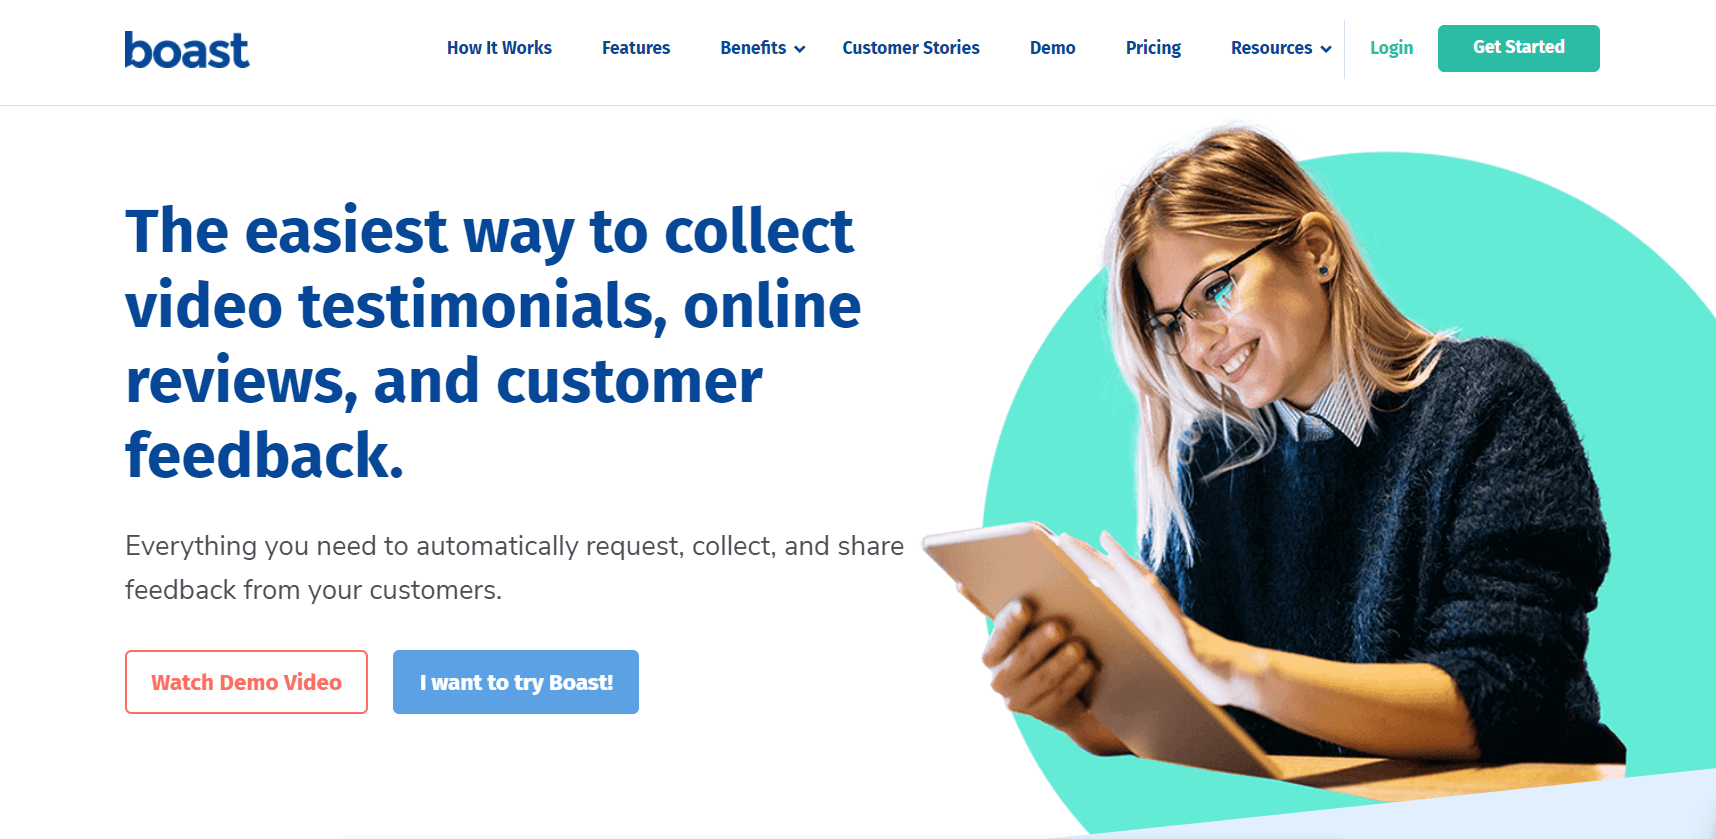 Boast.io homepage: The easiest way to collect video testimonials, online reviews, and customer feedback. 